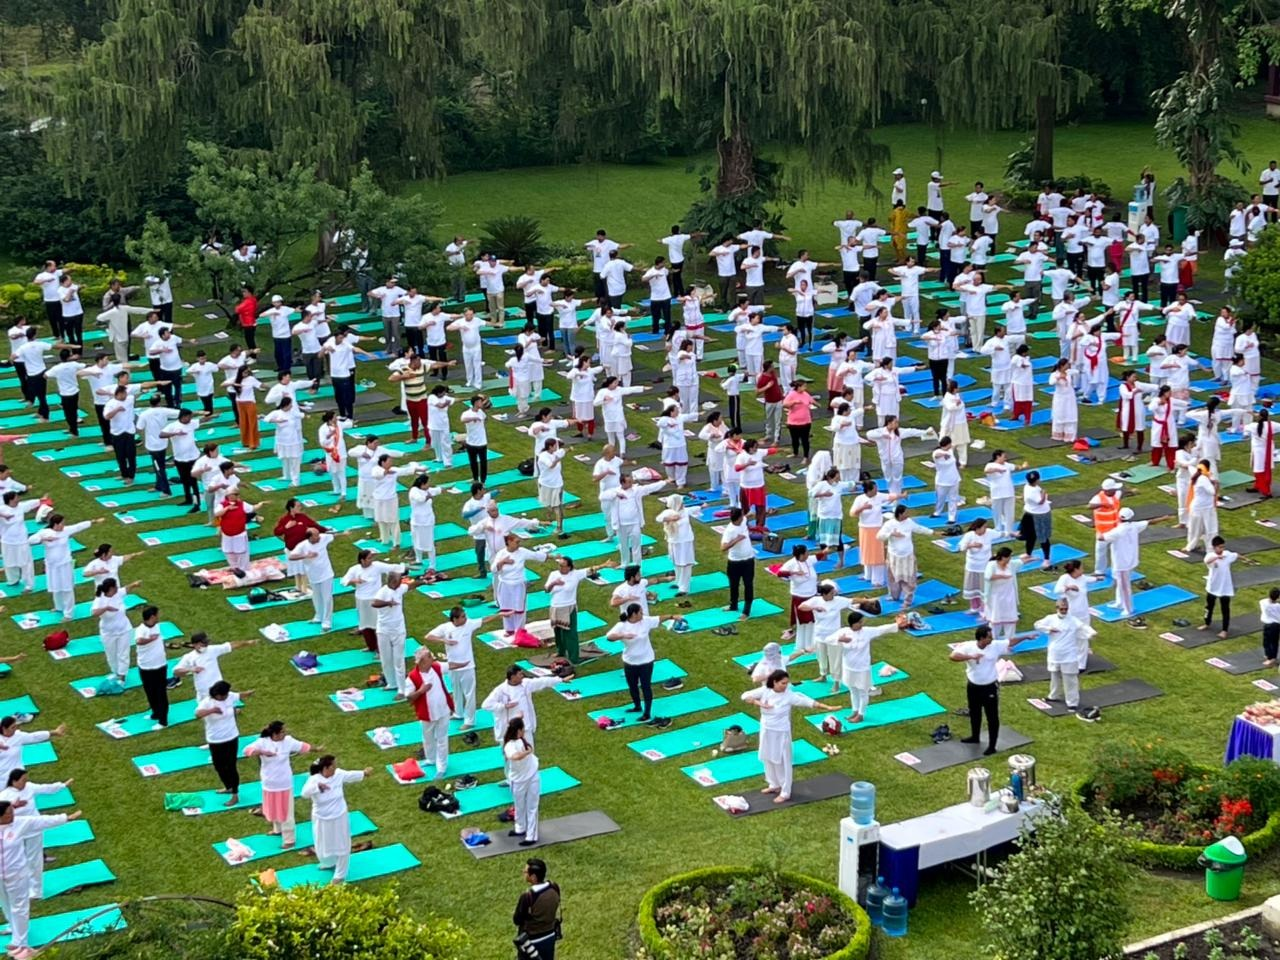 International Yoga Day being observed today